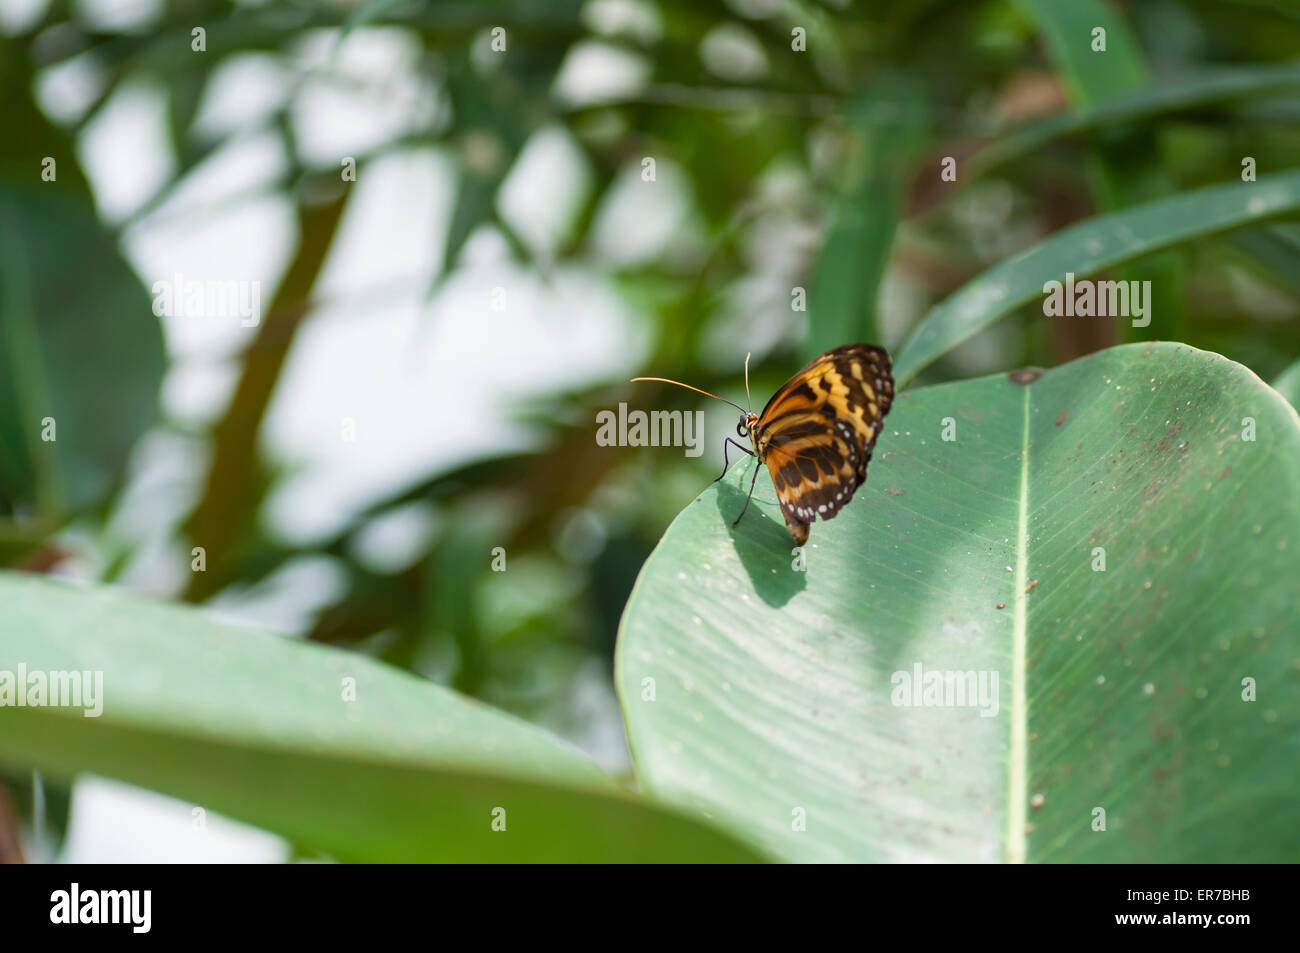 Danaus chrysippus butterfly of African Monarch. Taken on August 30, 2014 at The Bufferfly Arc, Montegrotto Terme, Padova, Italy. Stock Photo